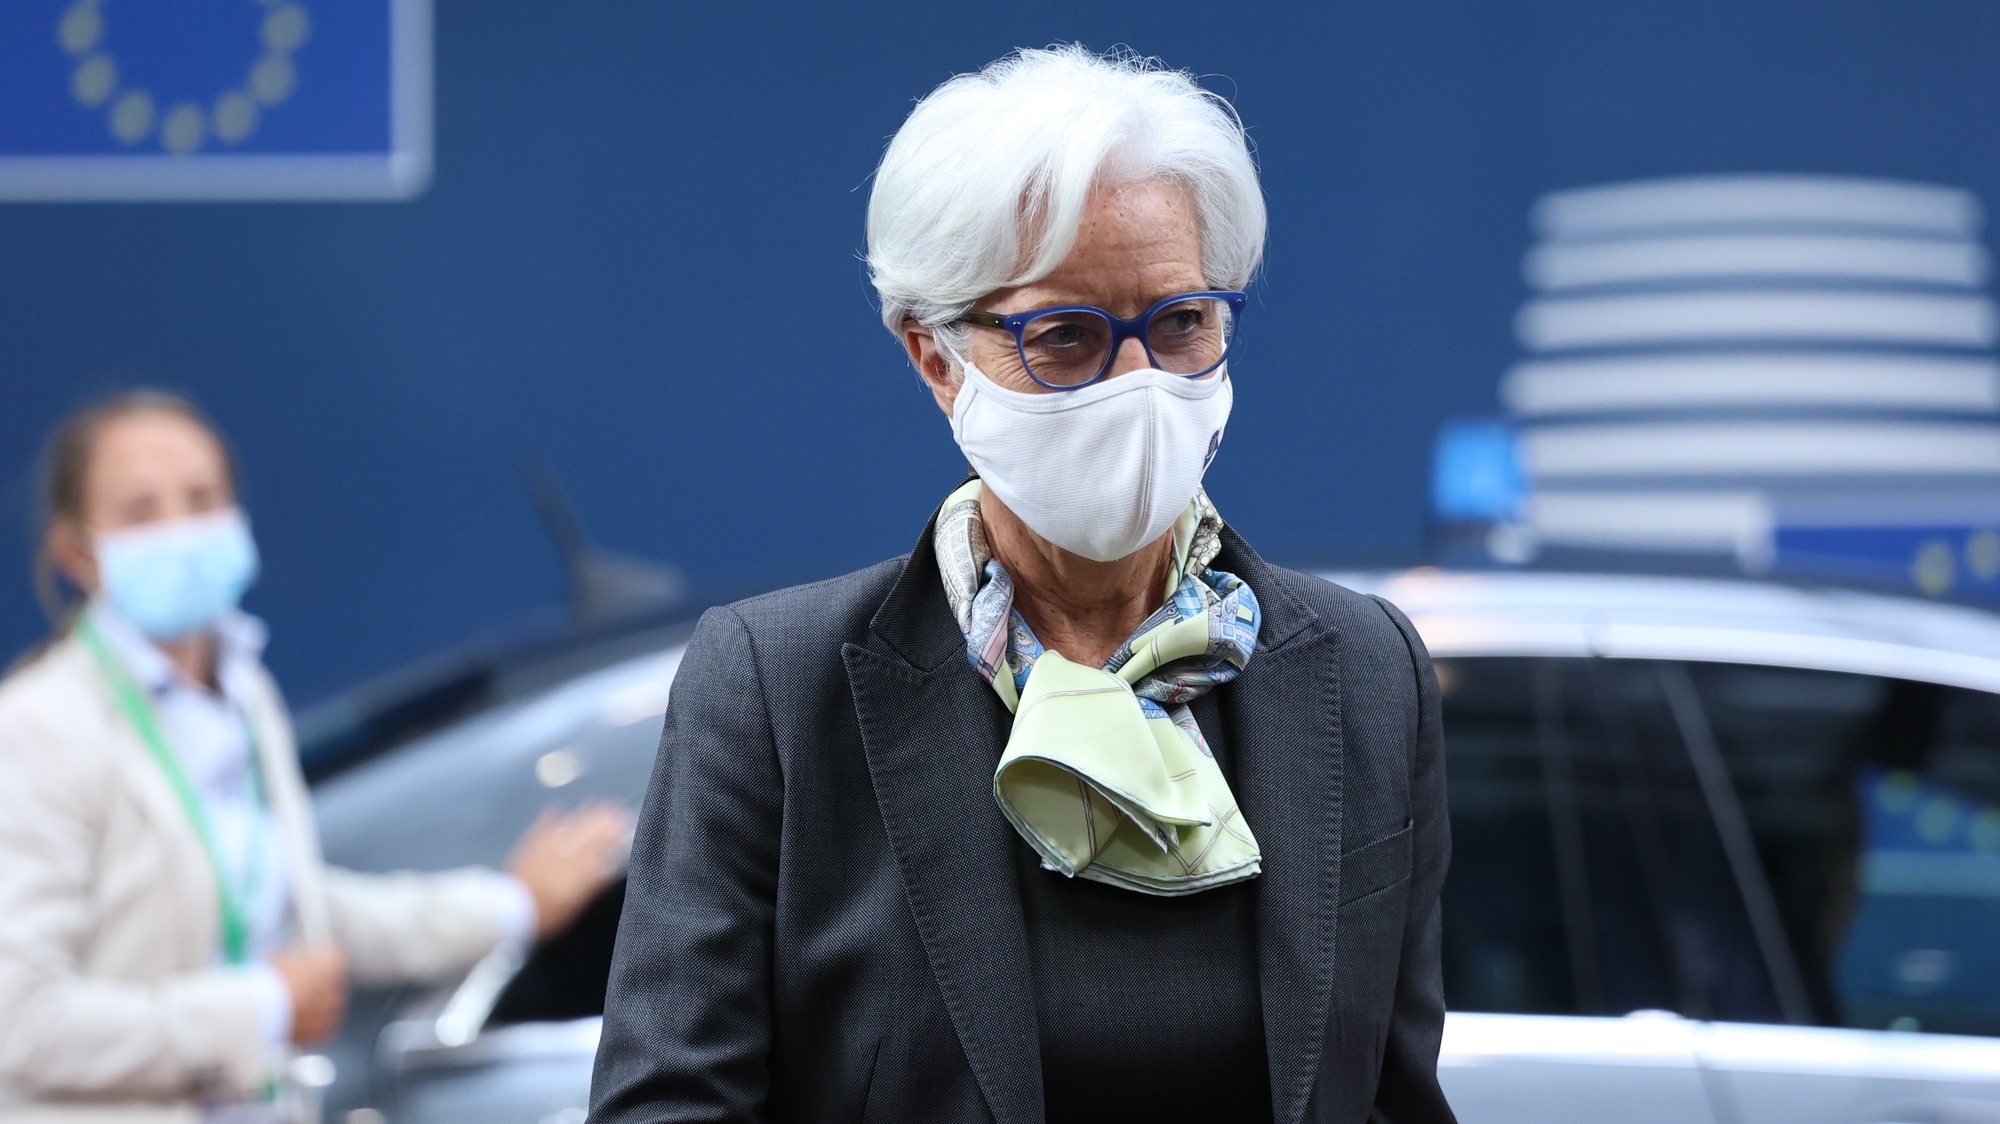 epa09300244 European Central Bank (ECB) President Christine Lagarde arrives on the second day of a European Union (EU) summit at The European Council Building in Brussels, Belgium, 25 June 2021. EU leaders meet in Brussels for two days to discuss COVID-19, economic recovery, migration and external relations.  EPA/ARIS OIKONOMOU / POOL